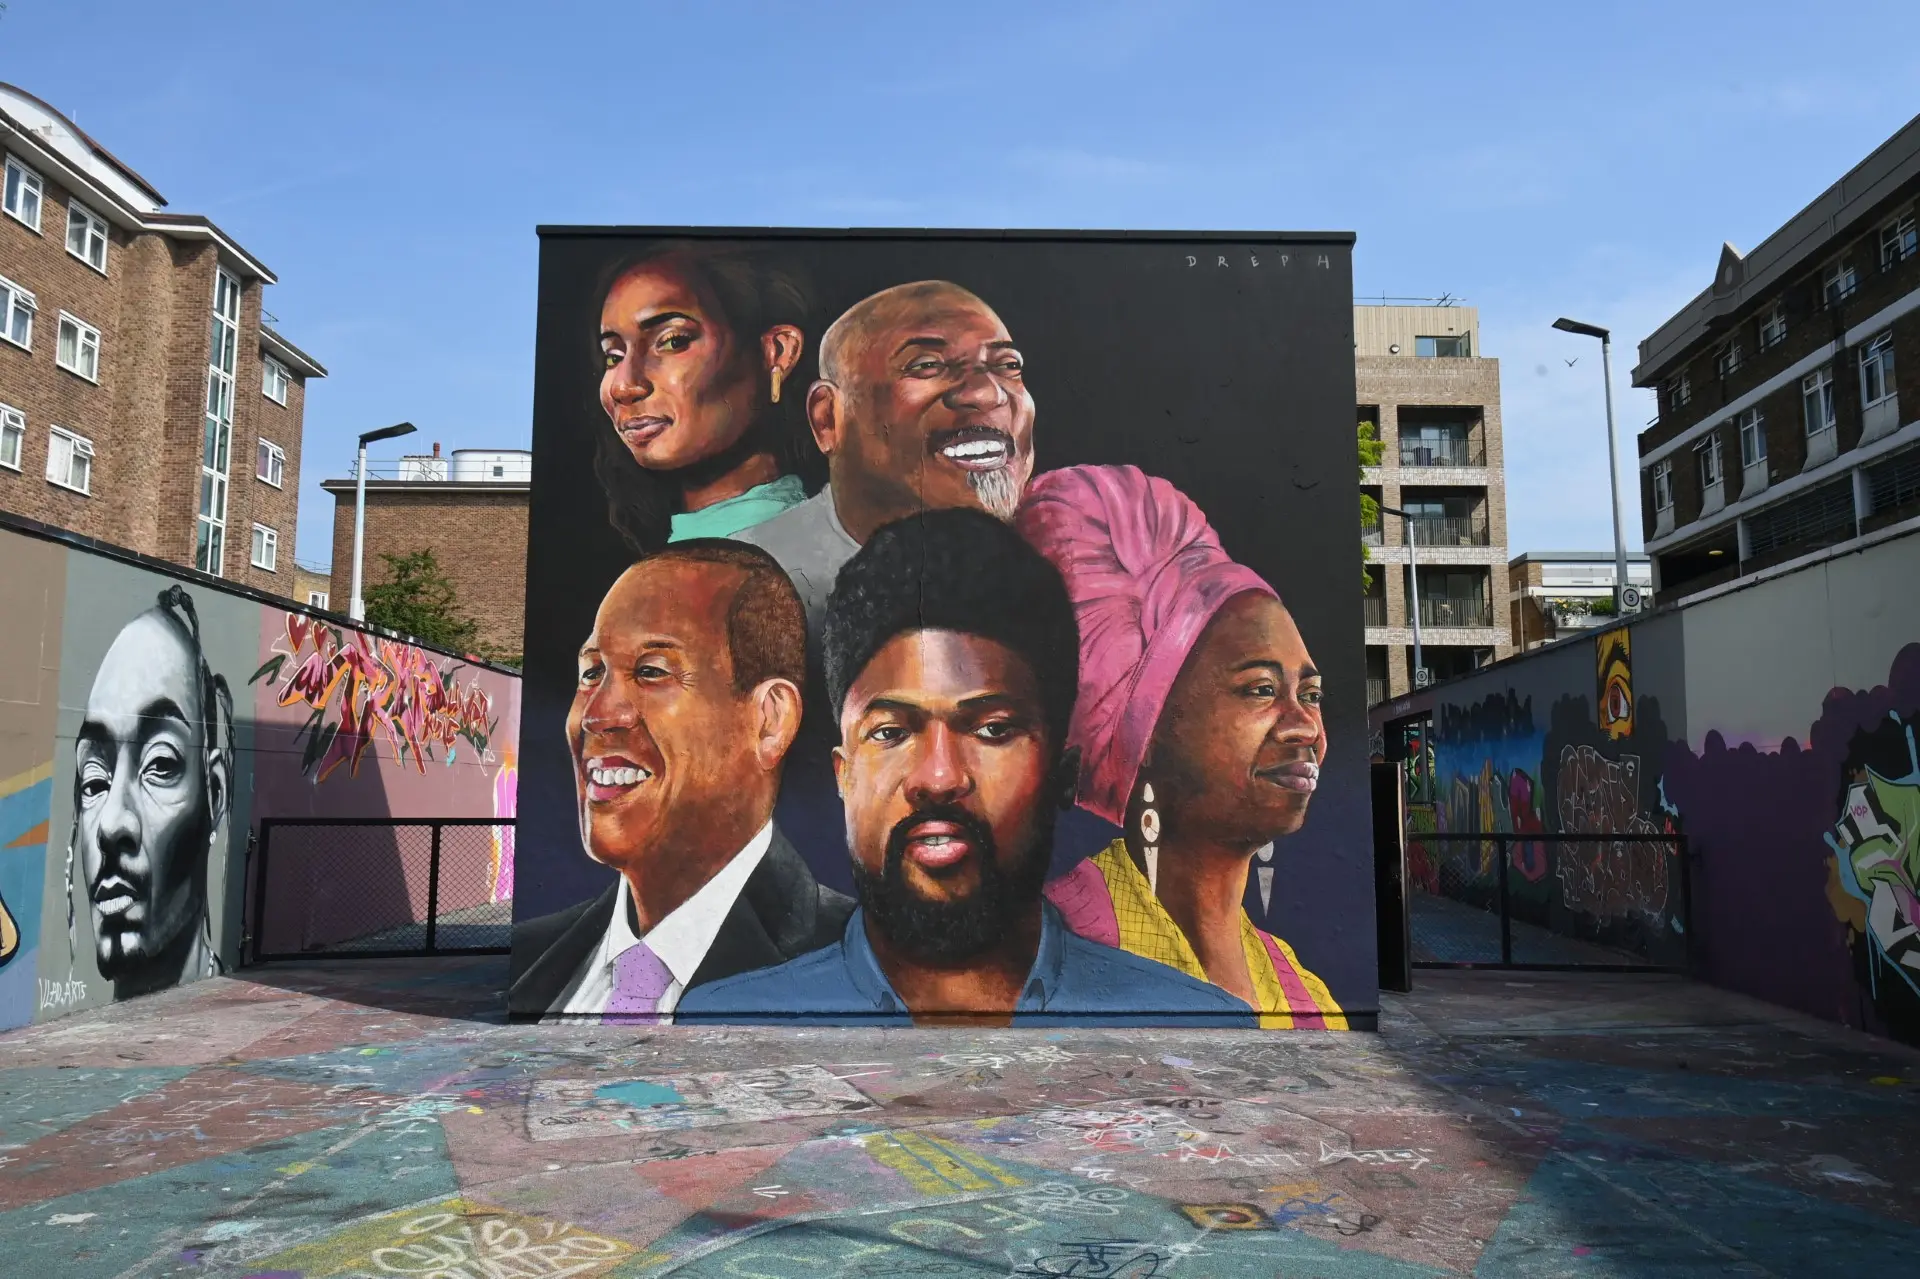 Mural of 5 black heritage blood donors who are the face of NHS campaign. There are 3 men and 2 ladies.